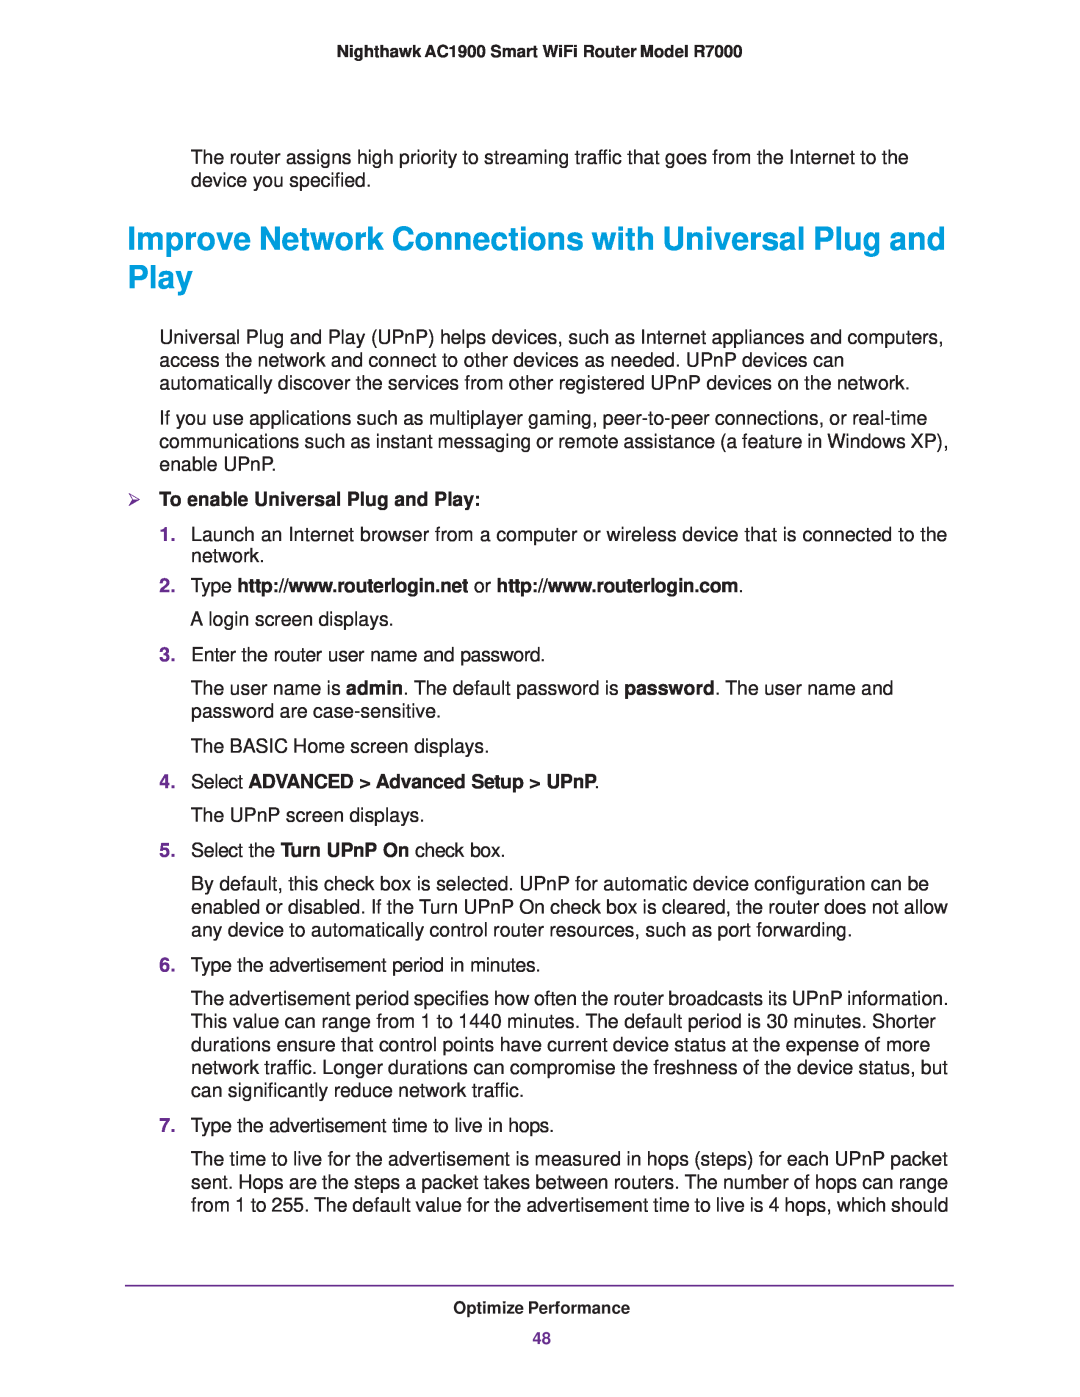 NETGEAR R7000 user manual Improve Network Connections with Universal Plug and Play,  To enable Universal Plug and Play 